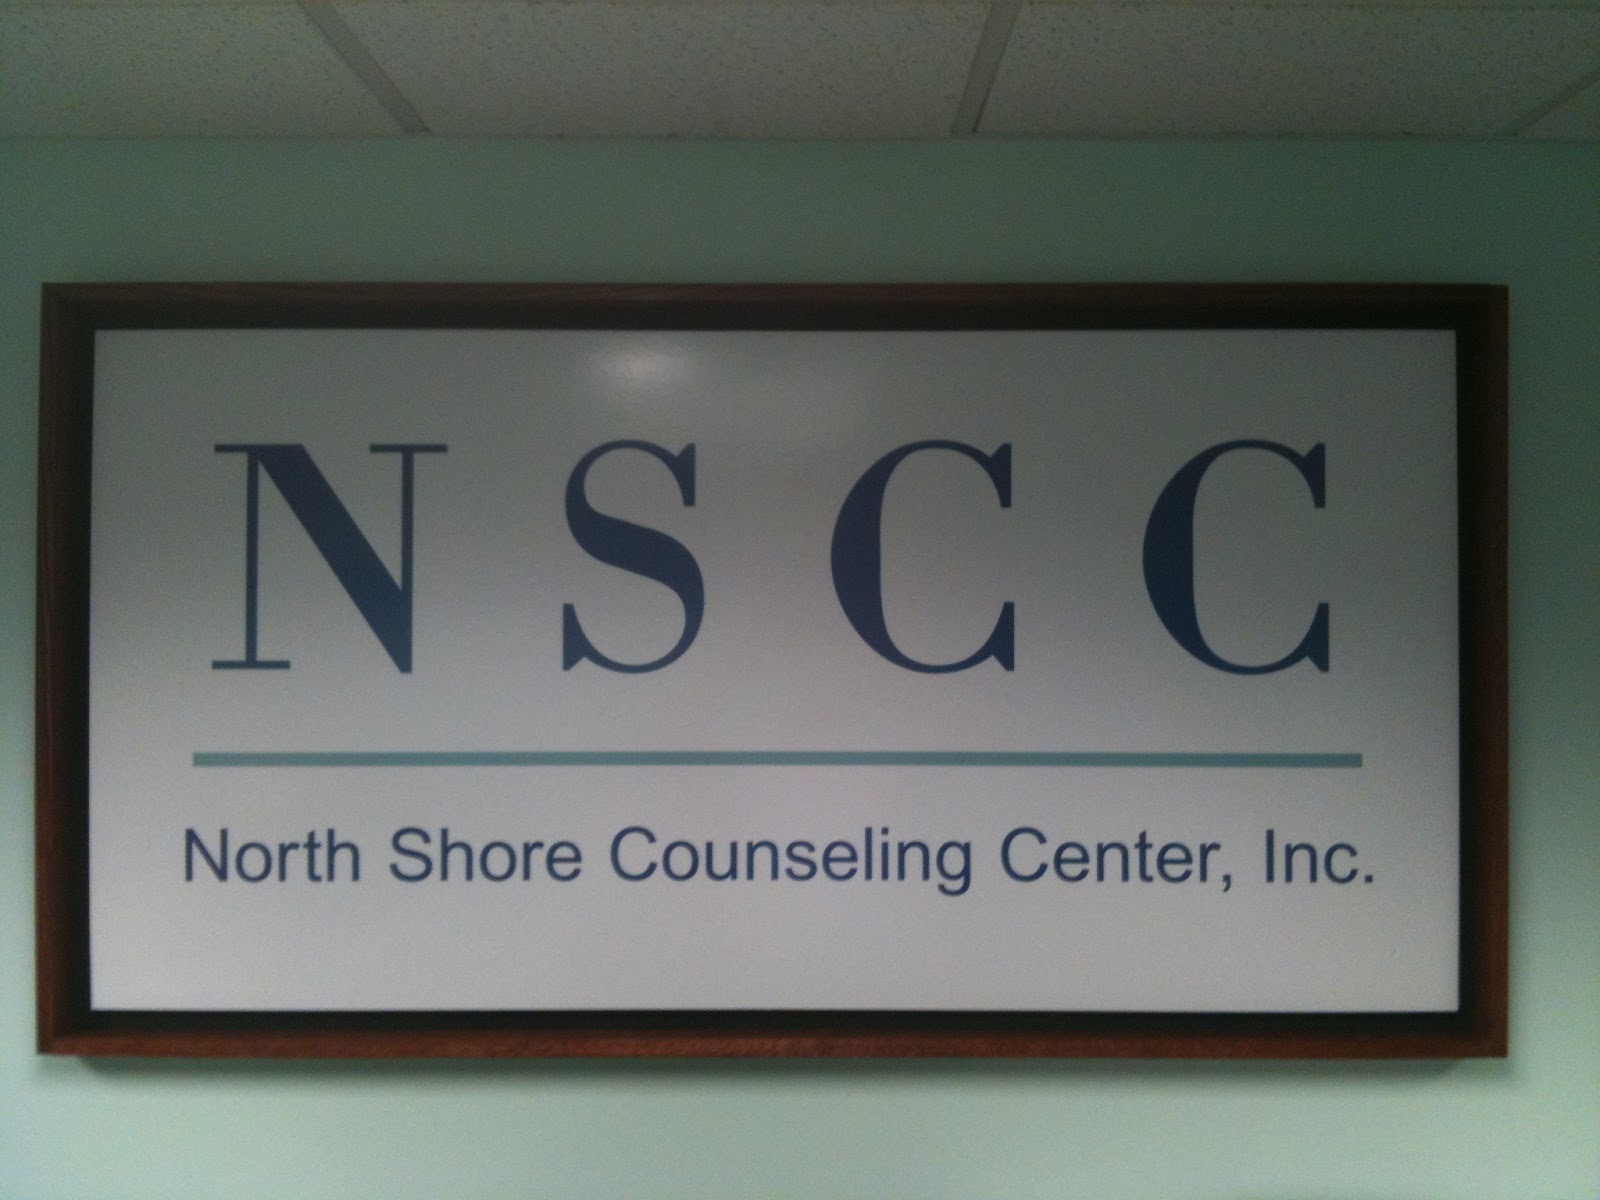 North Shore Counseling Center